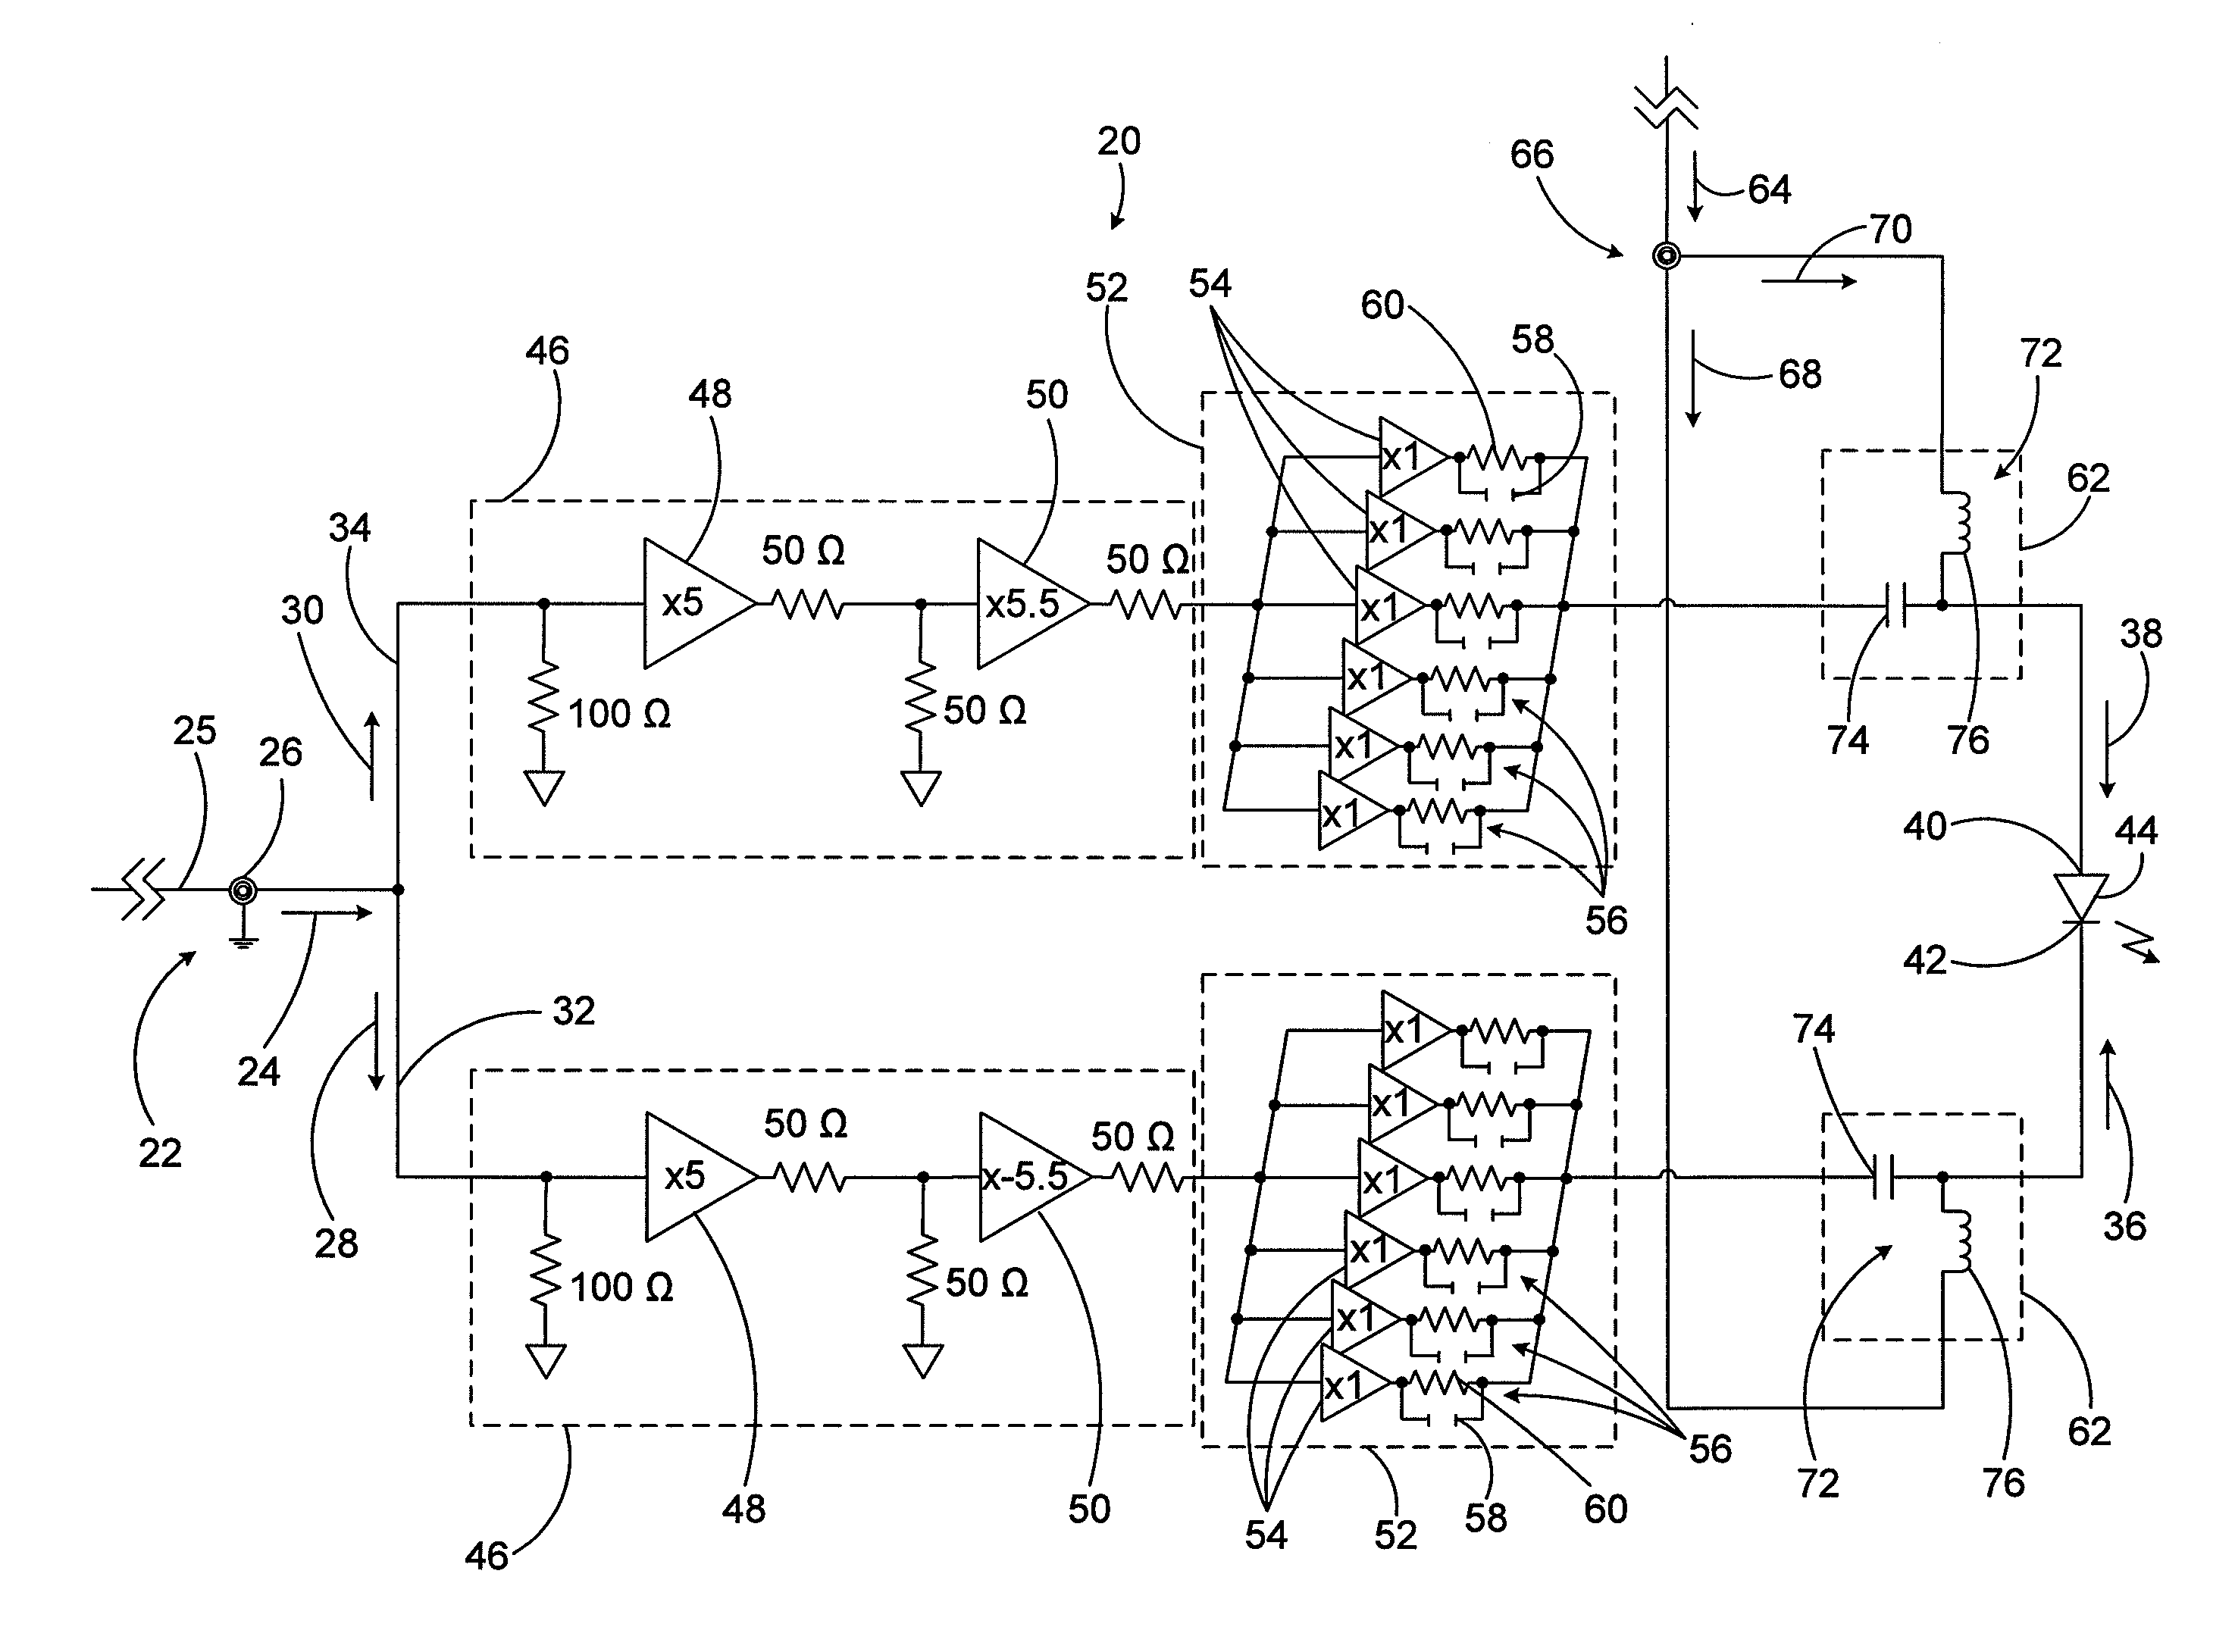 Driver circuit for the direct modulation of a laser diode